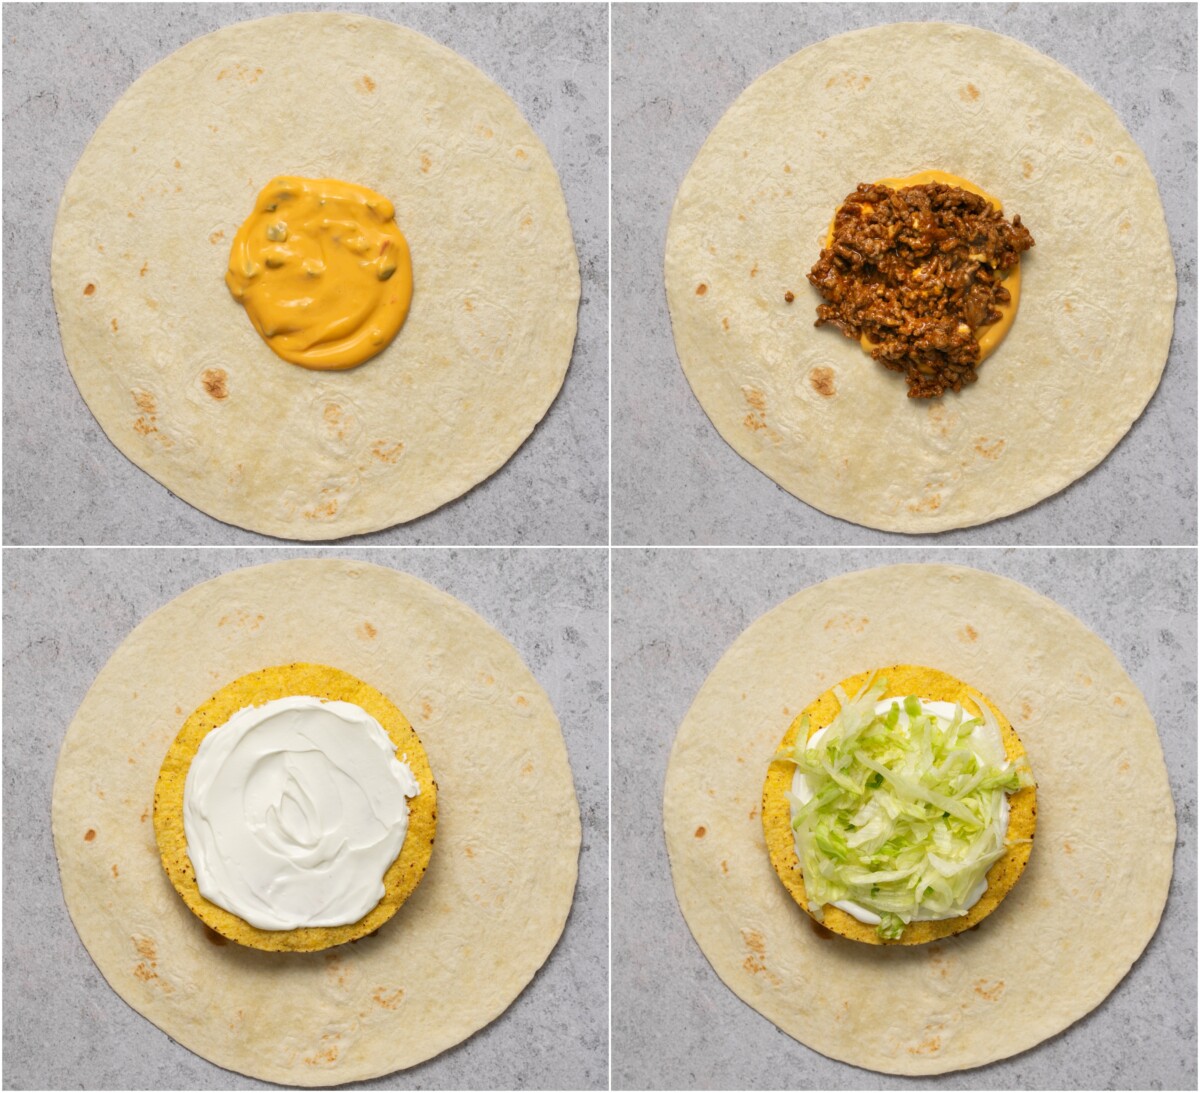 Process photos of queso, ground beef, tostada, sour cream, and lettuce going in the middle of a tortilla